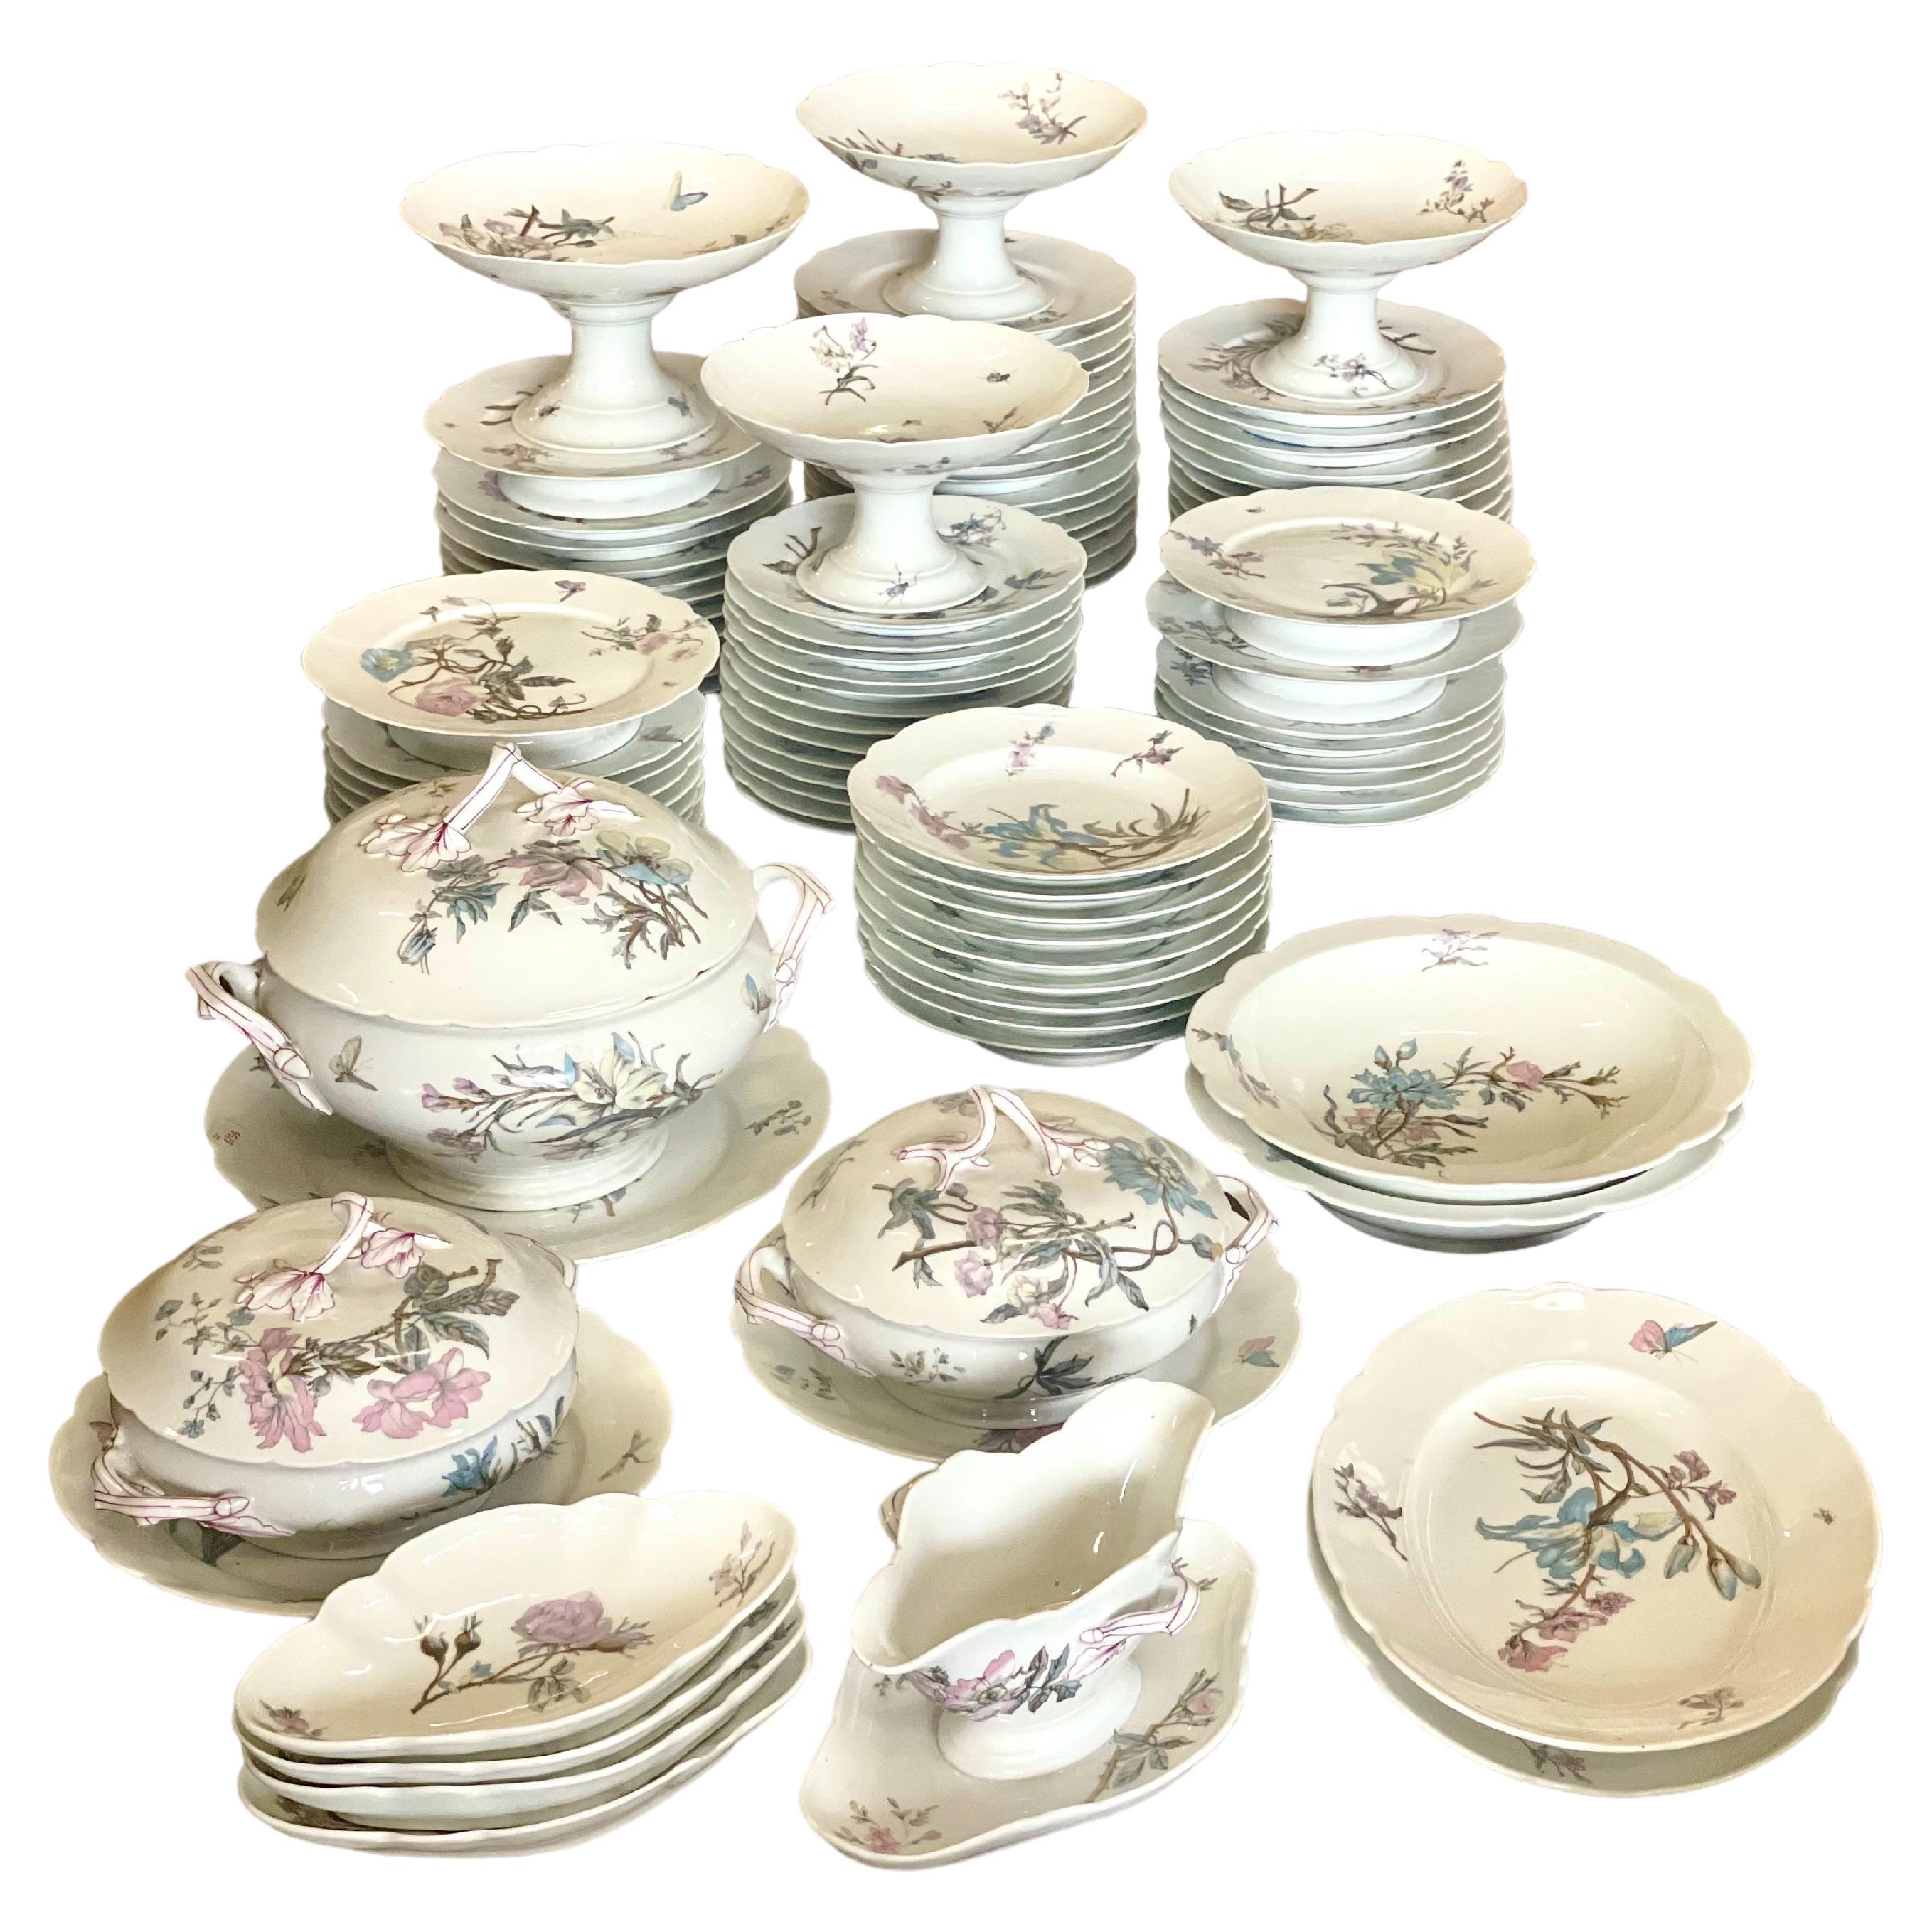 102-Piece Porcelain Dinner Service with Flowers and Butterflies